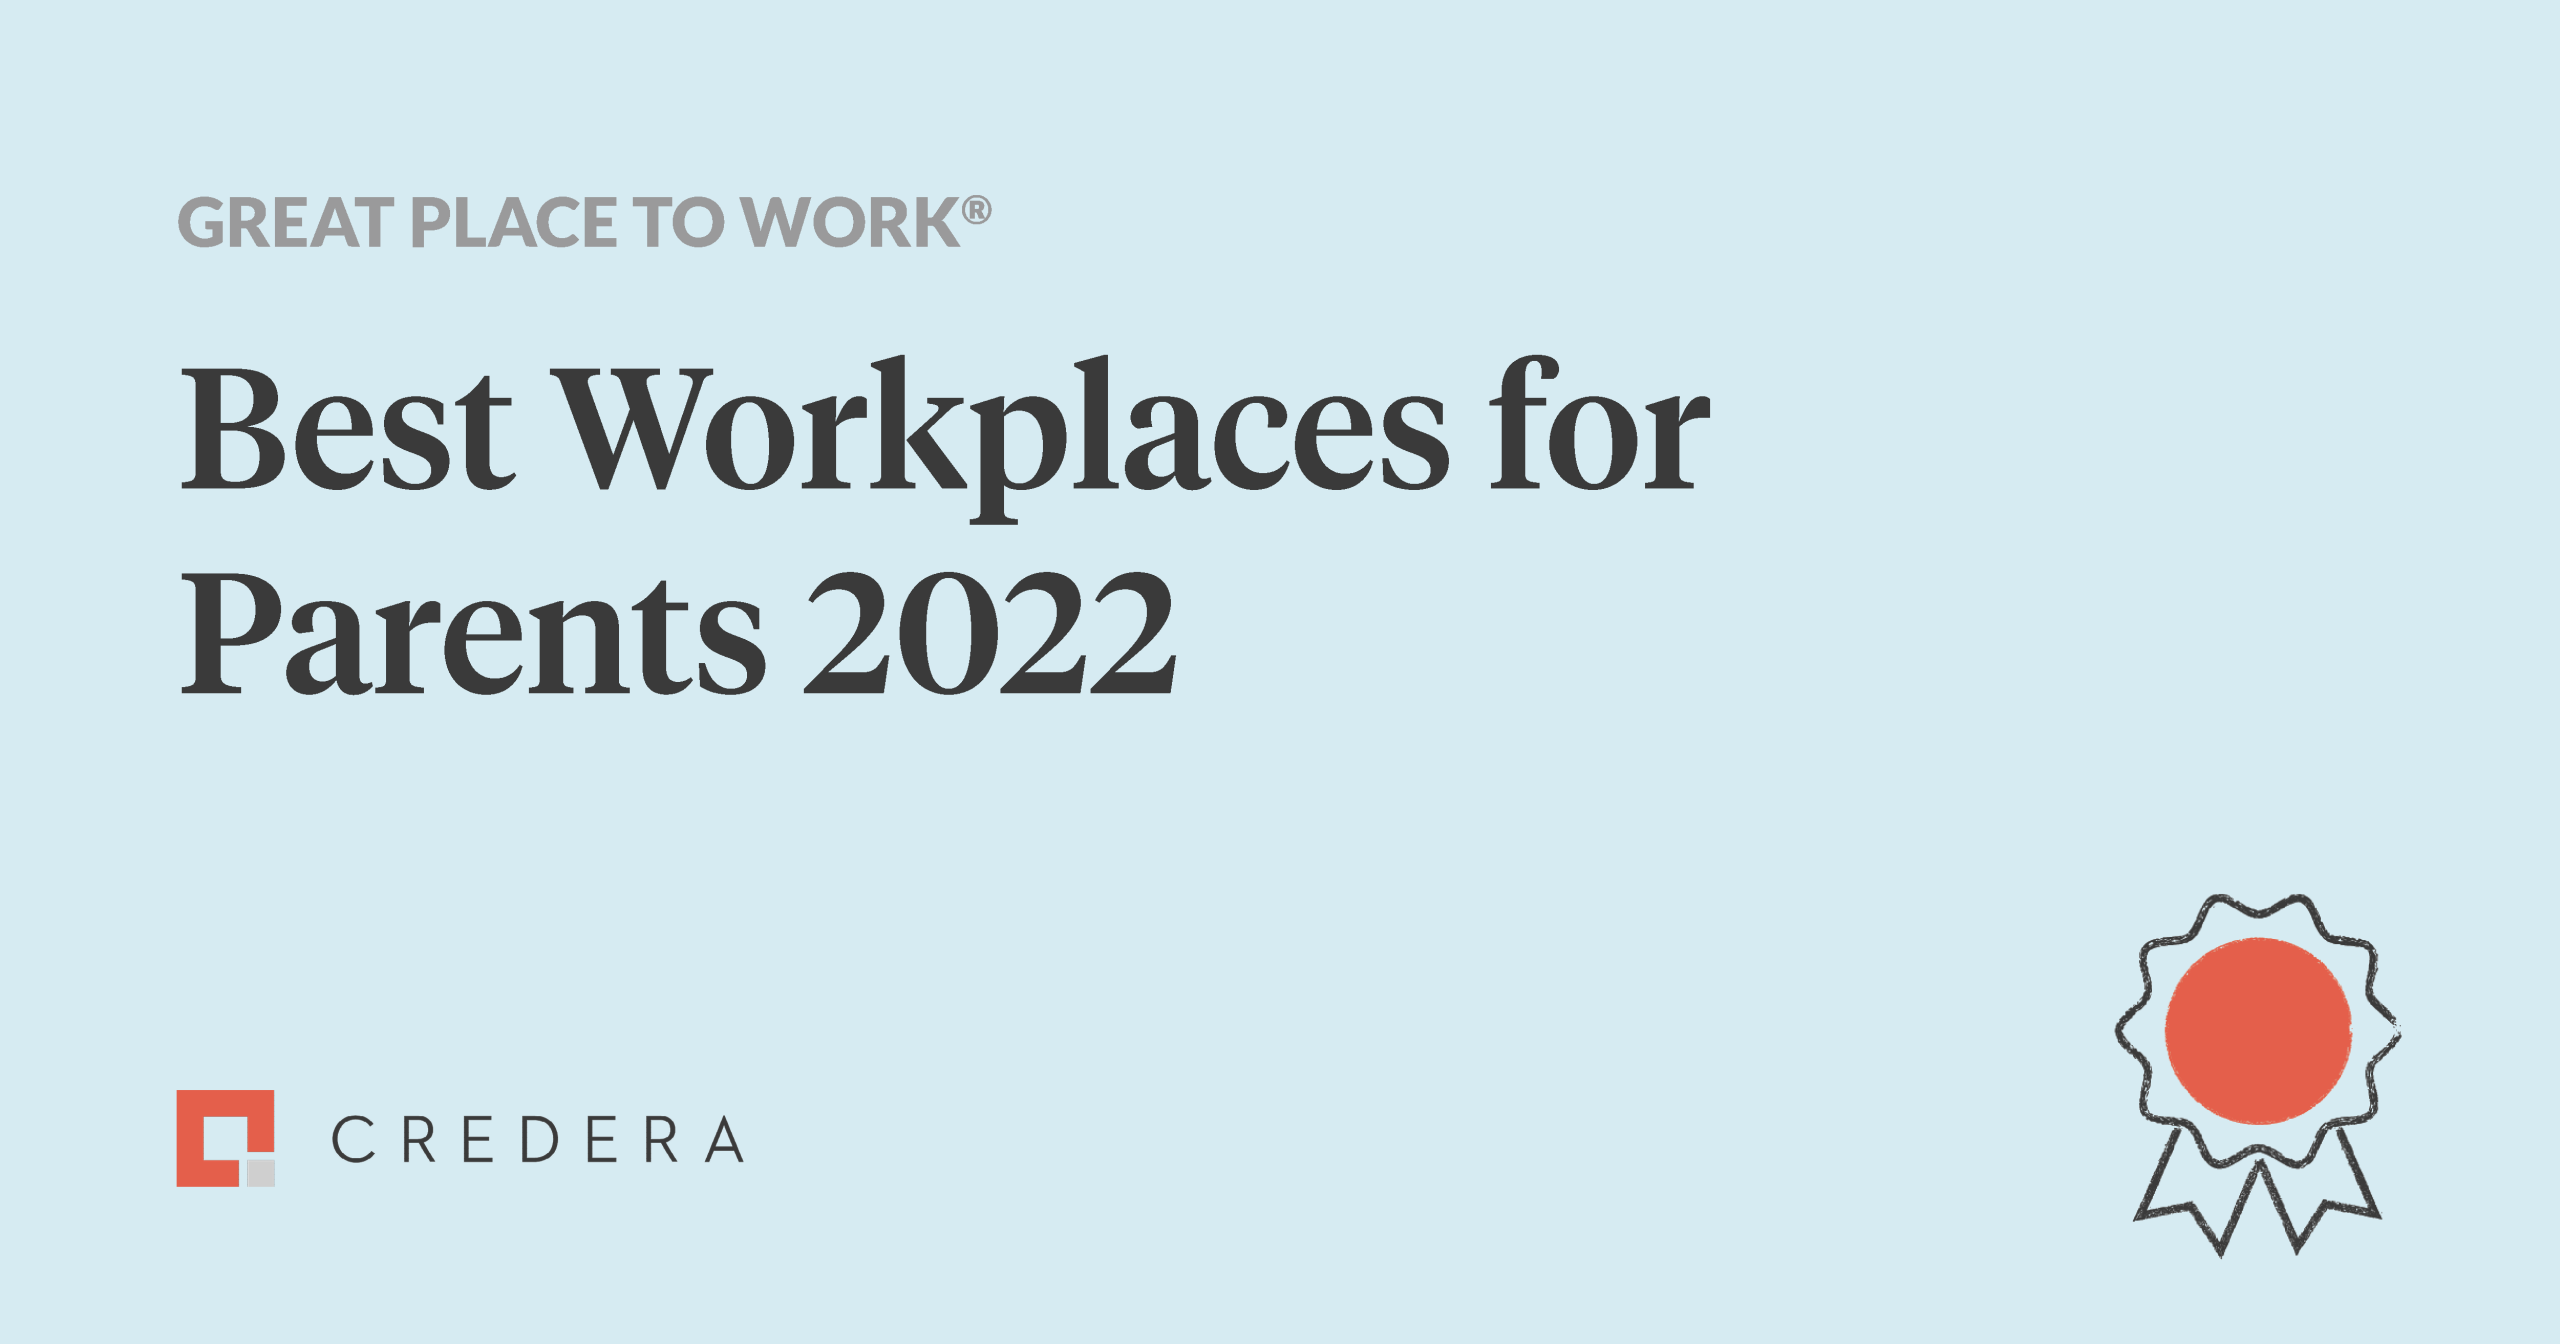 Credera Honored as a 2022 Best Workplace for Parents